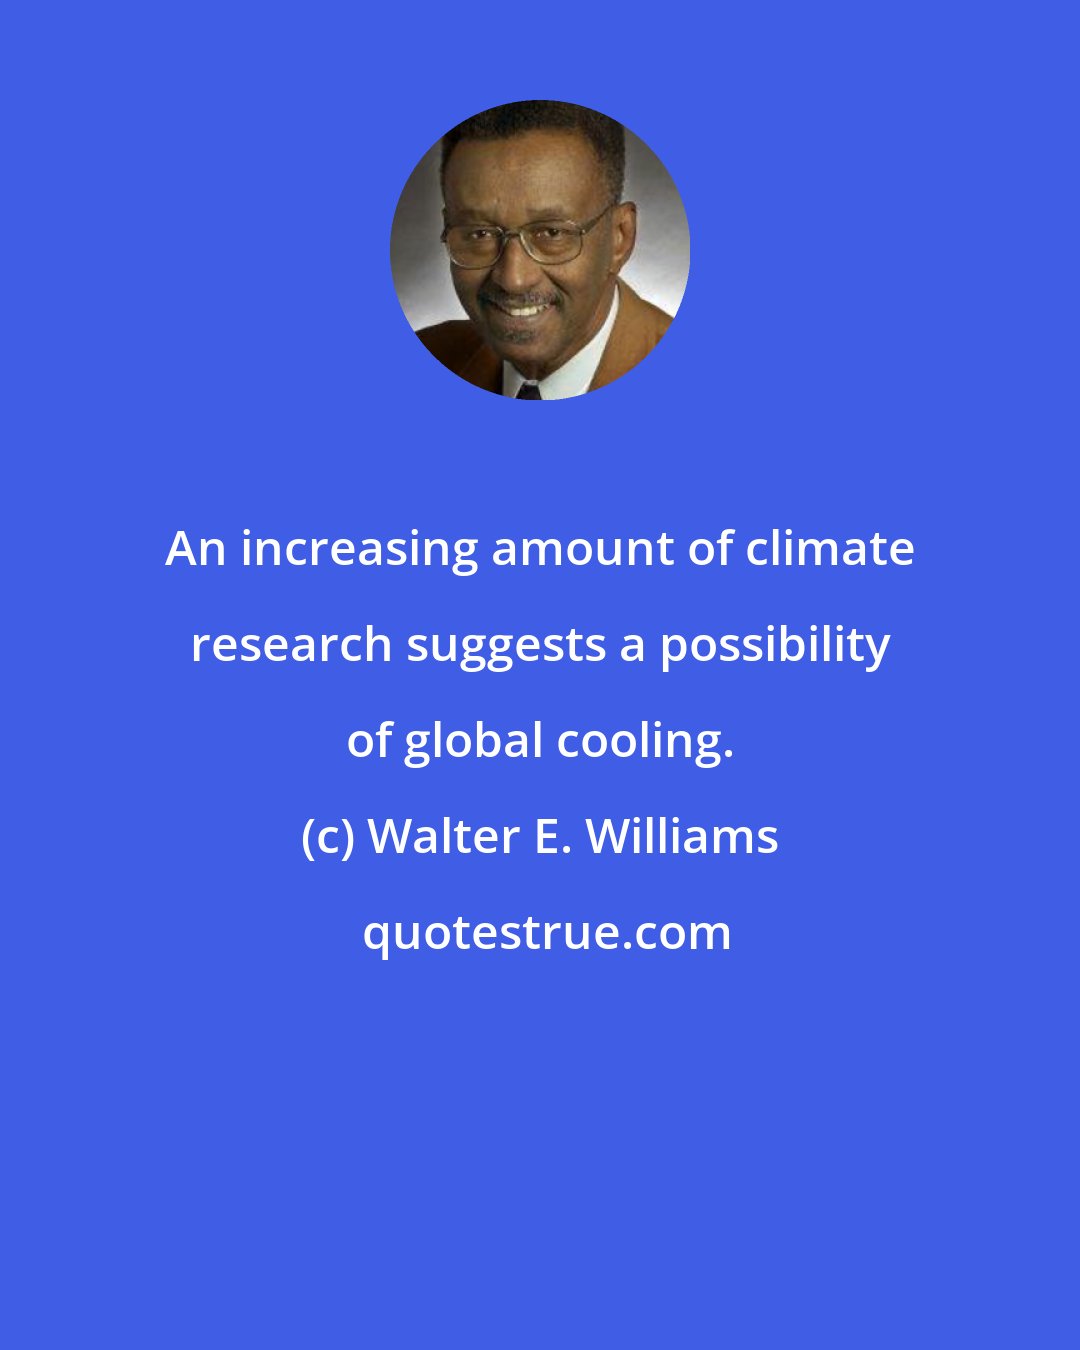 Walter E. Williams: An increasing amount of climate research suggests a possibility of global cooling.